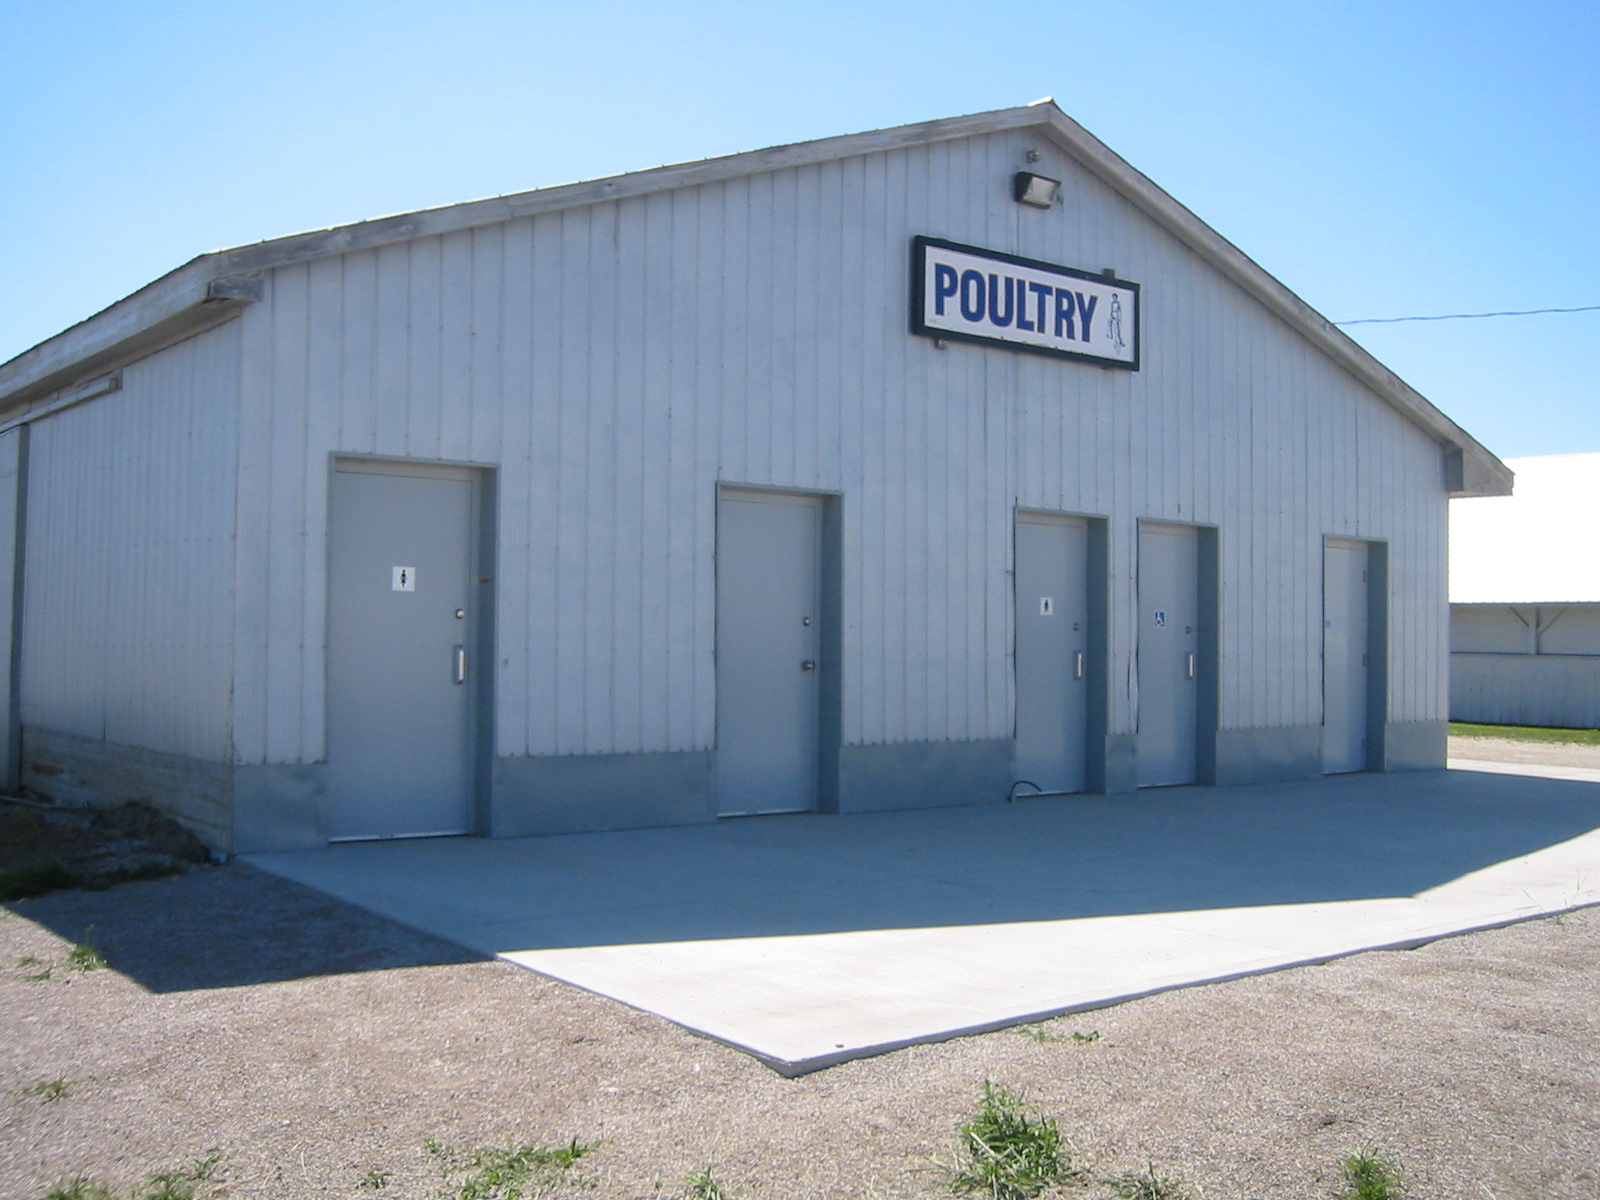 photo of the poultry barn